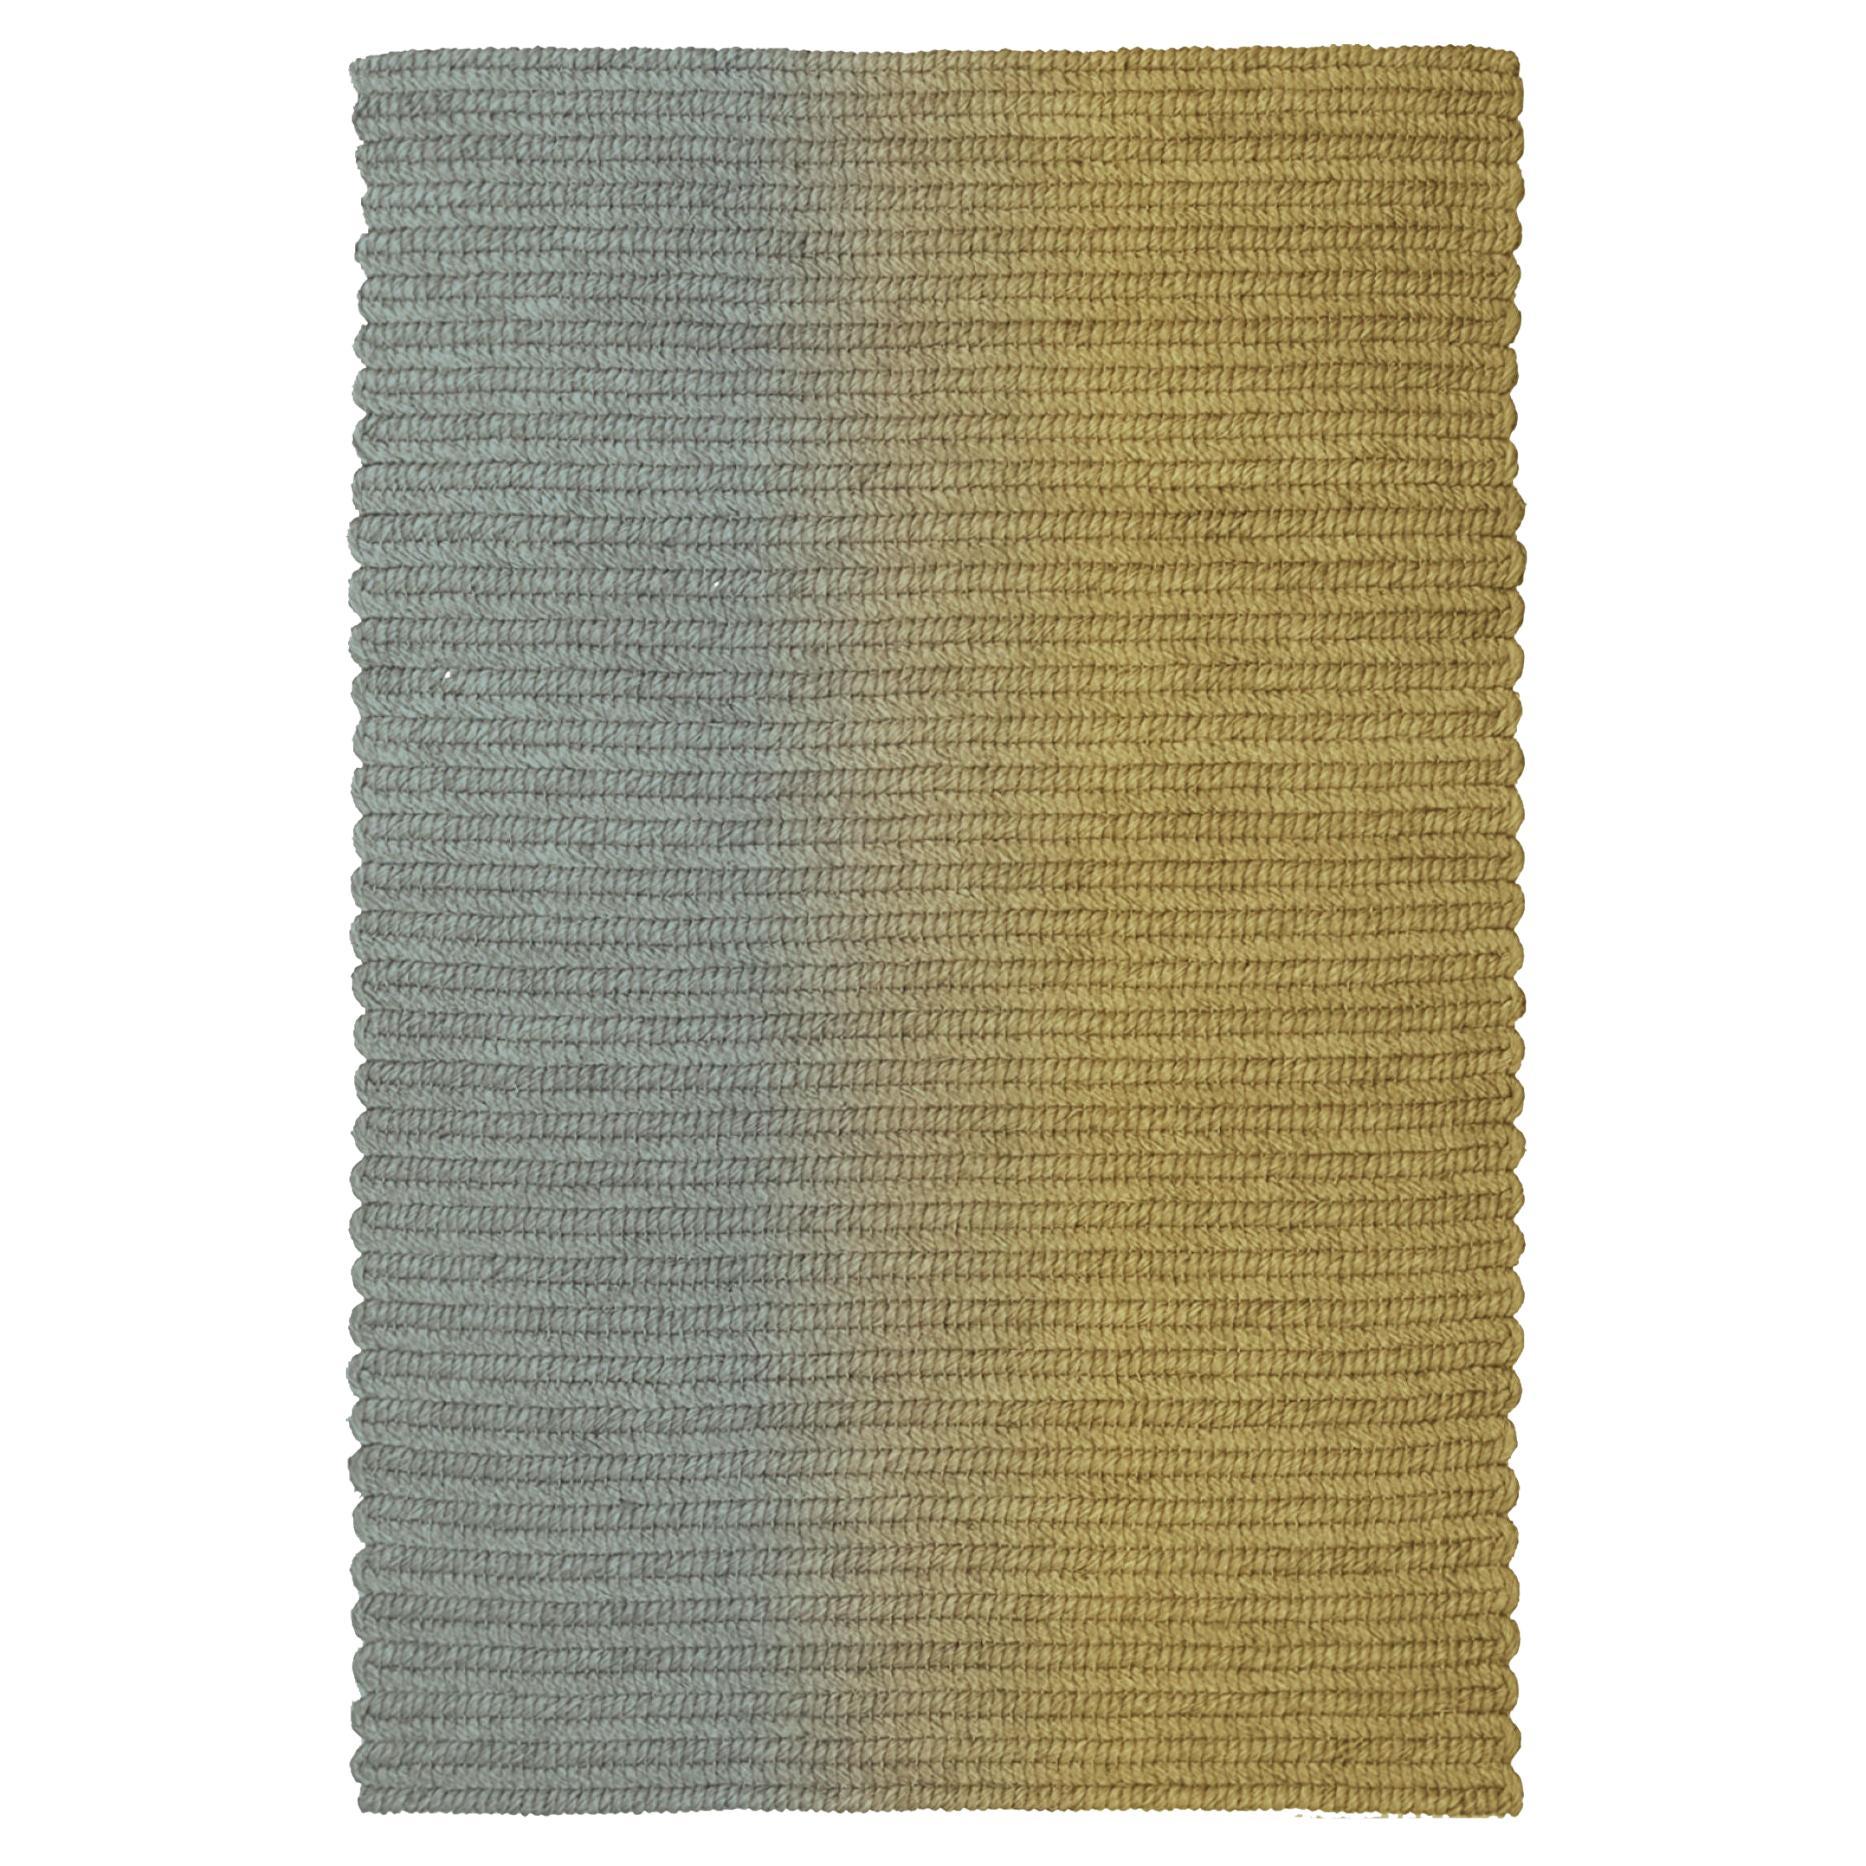 'Switch' Rug in Abaca, 'Pampas', by Claire Vos for Musett Design For Sale